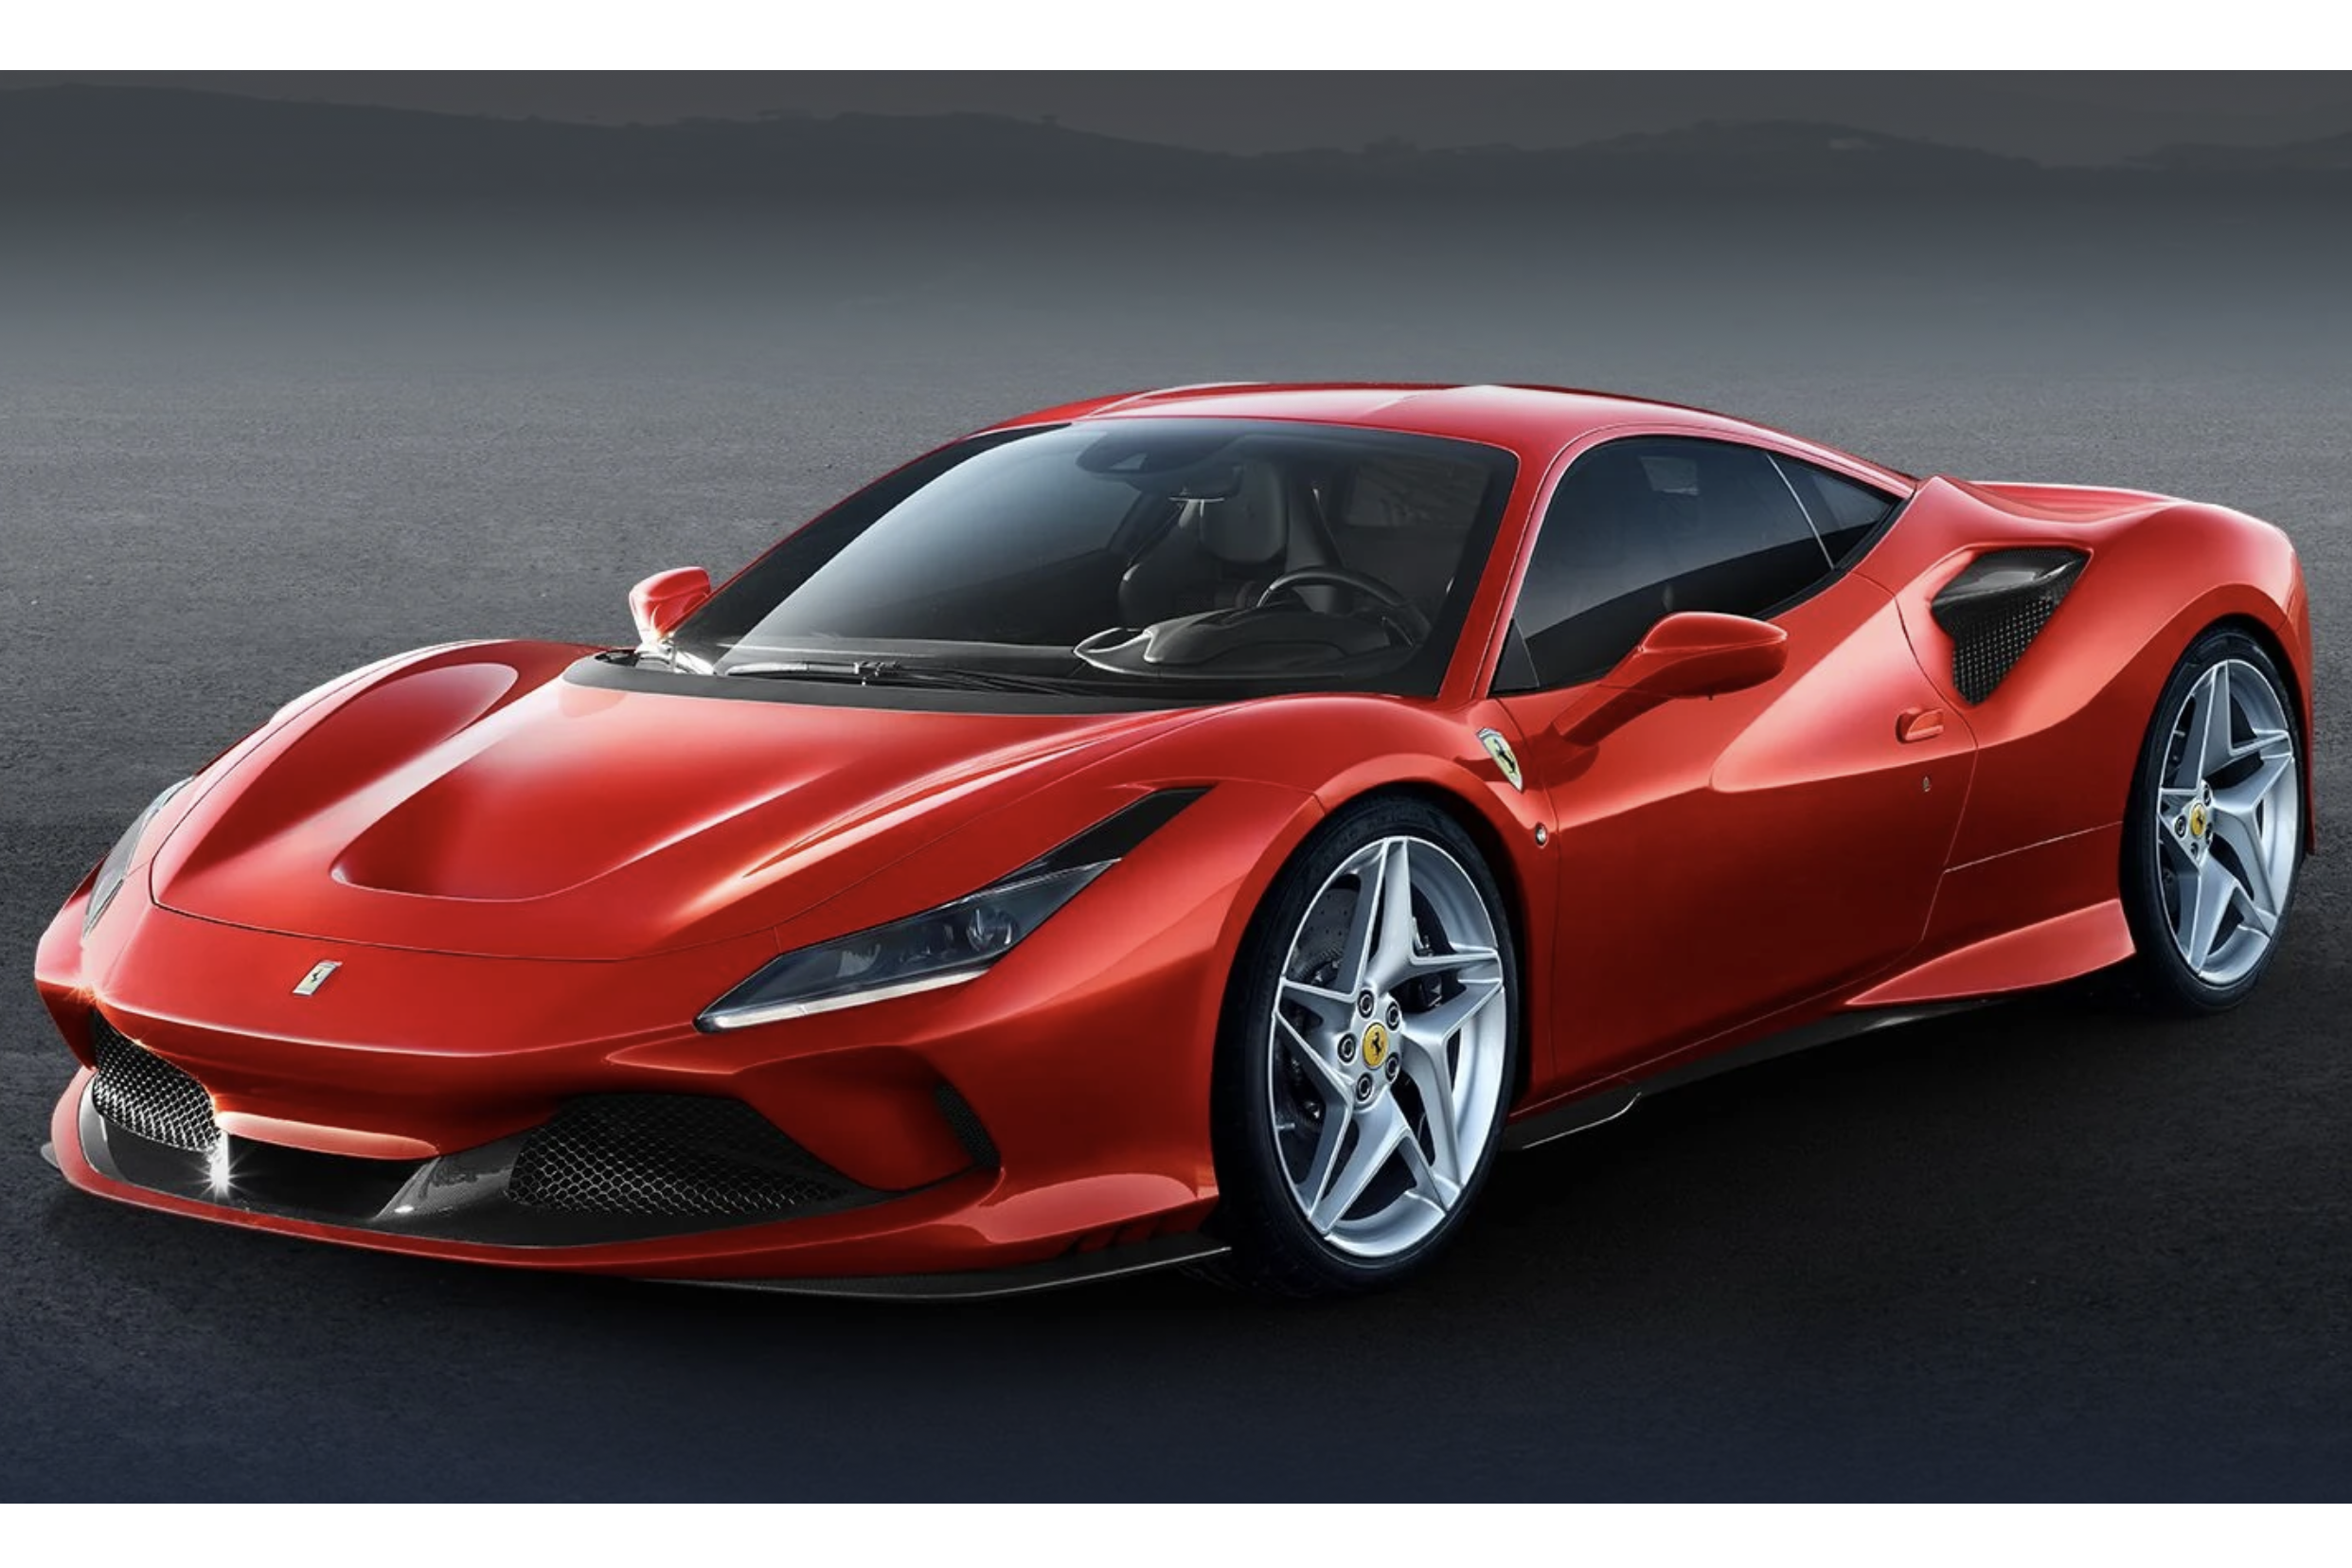 Cryptocurrency is an Accepted Form of Payment for Ferrari Supercars